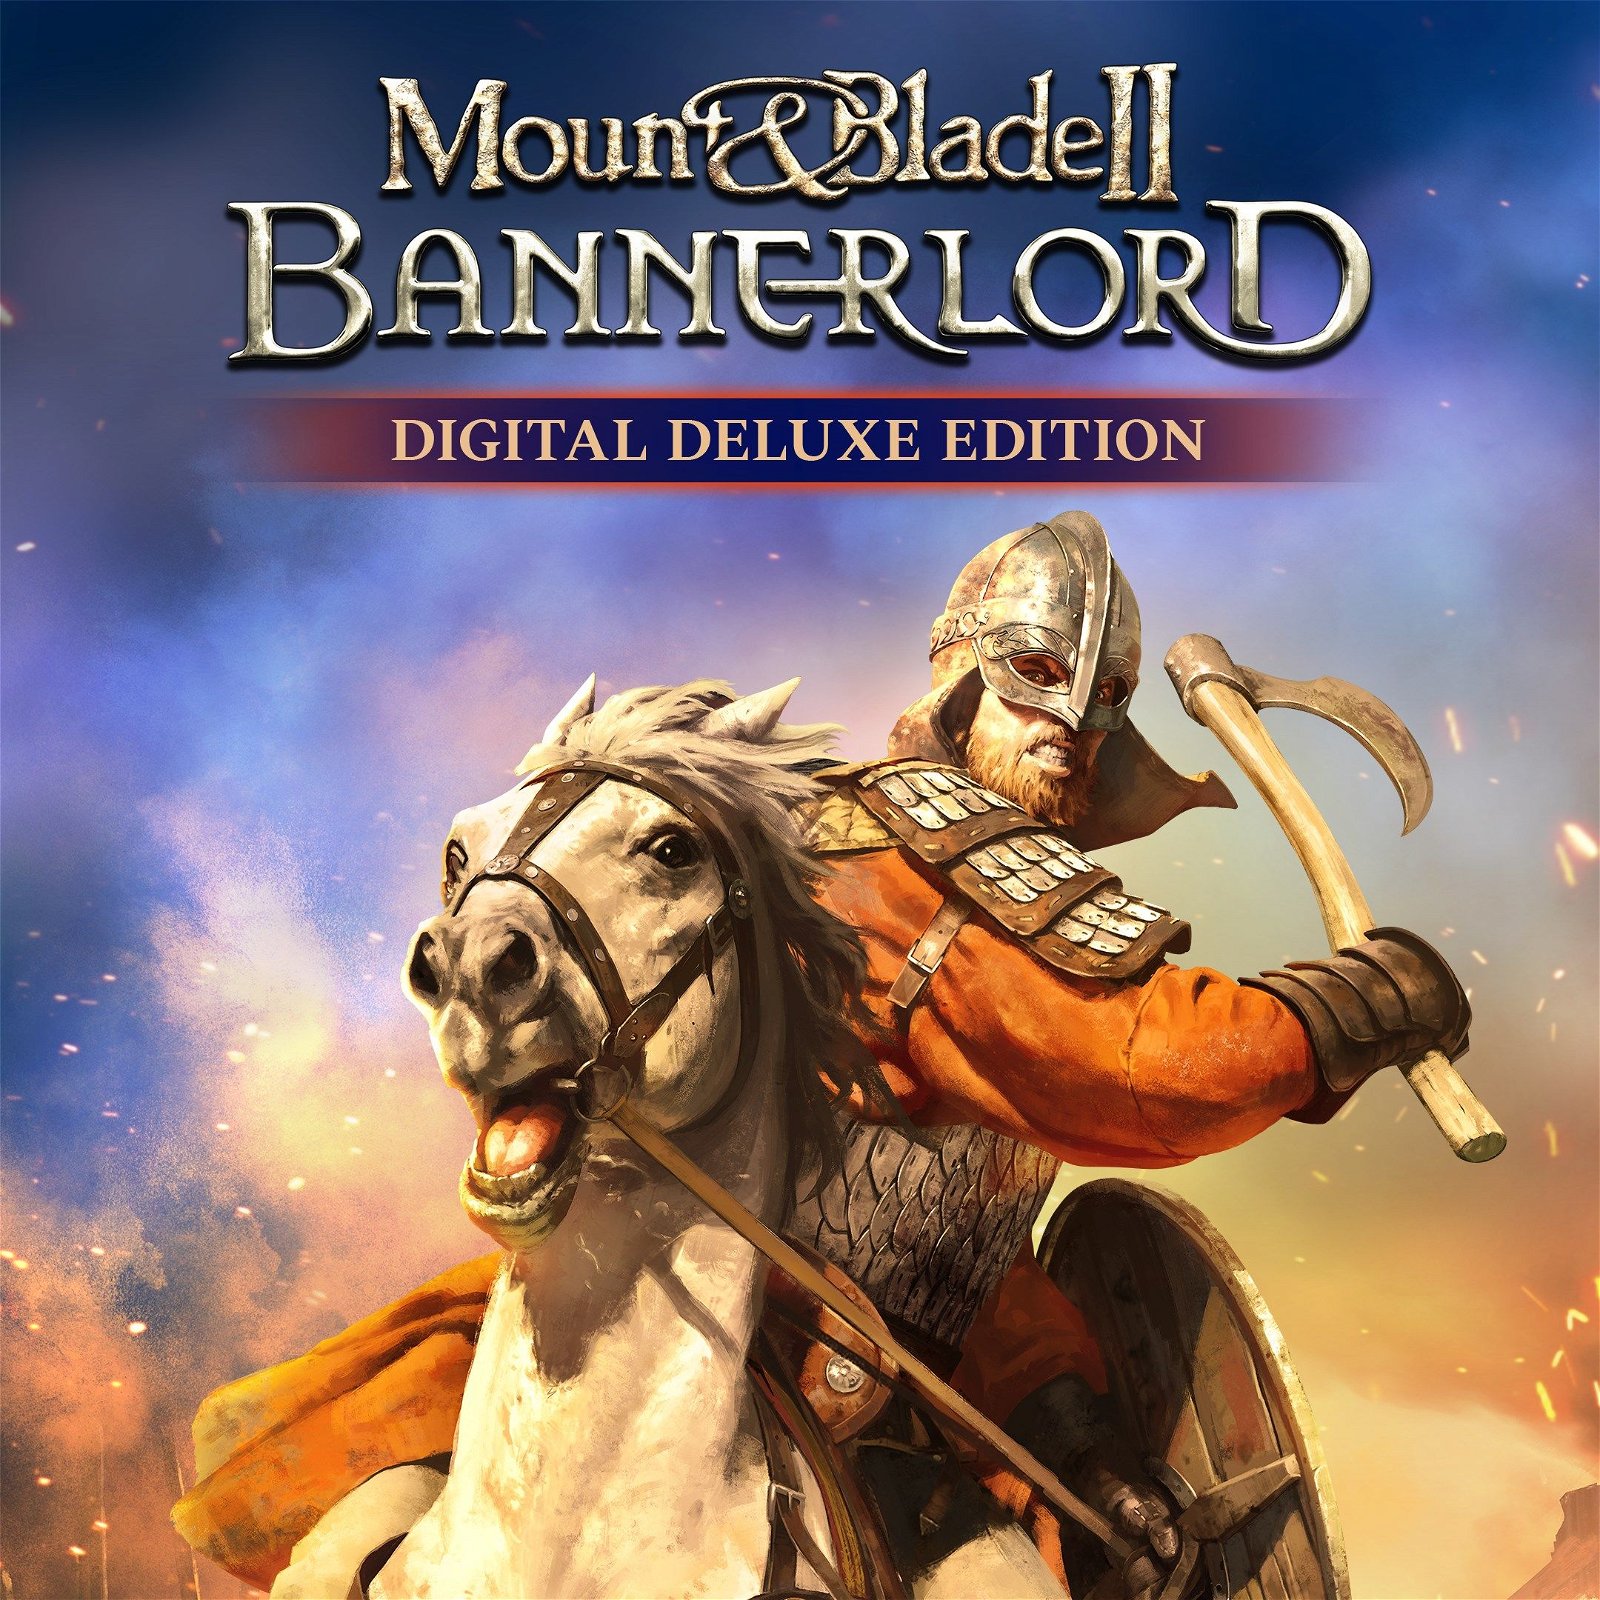 Image of Mount & Blade II: Bannerlord Digital Deluxe Edition